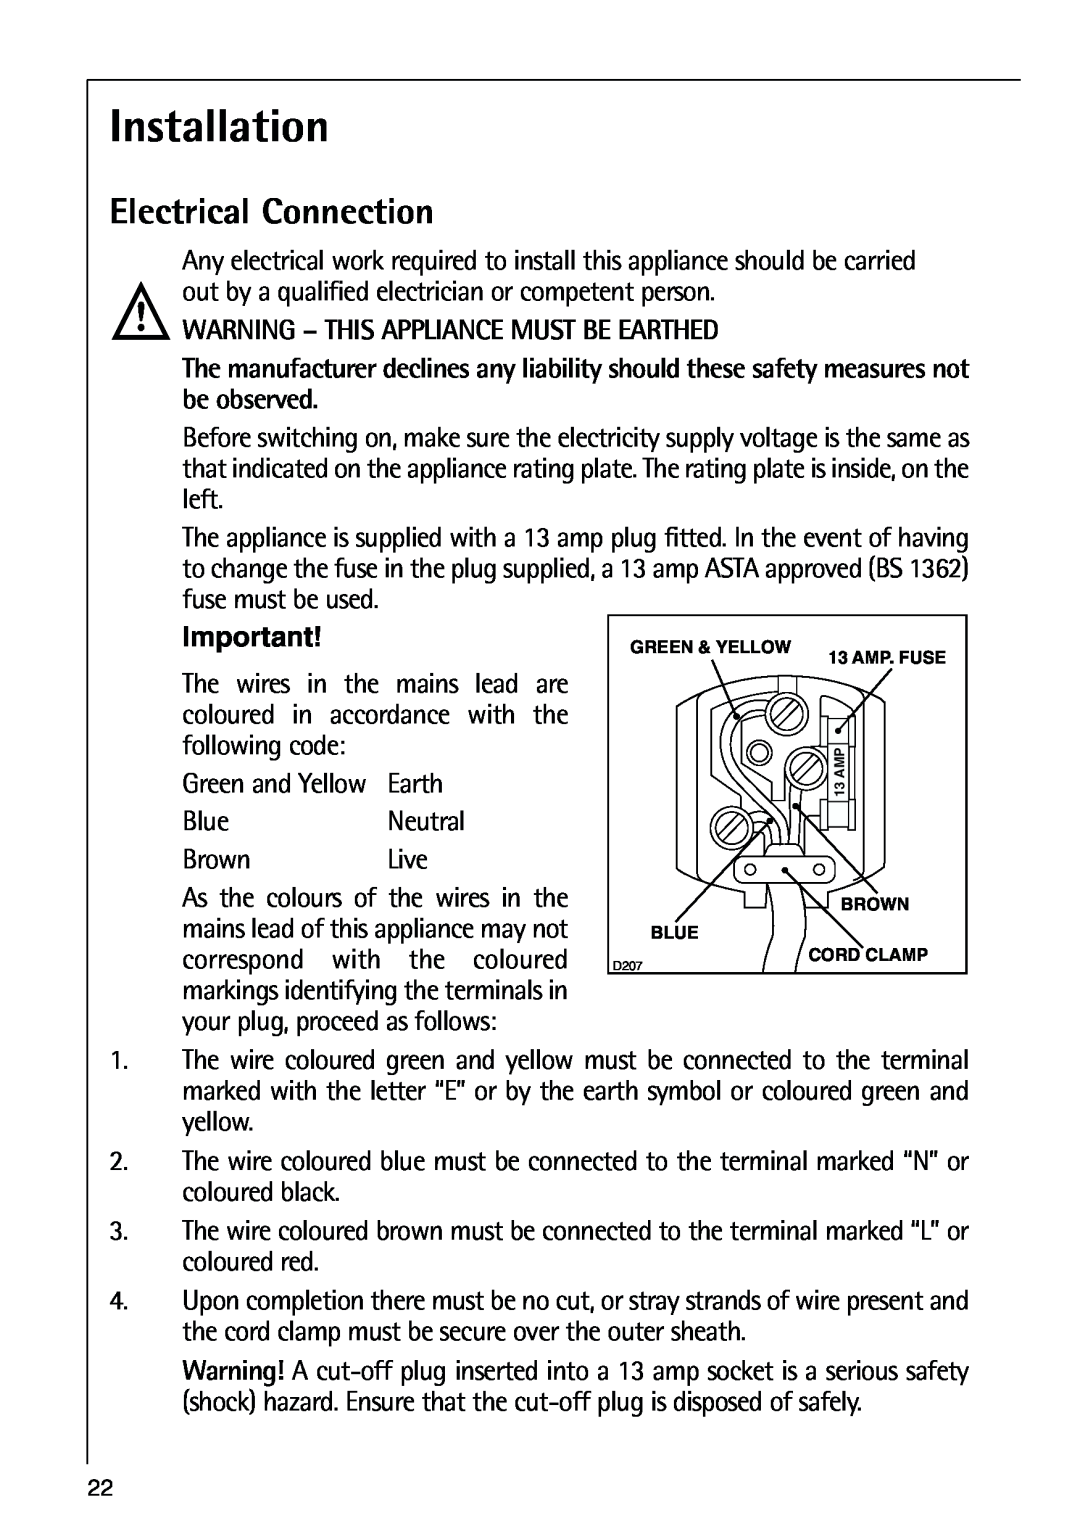 Electrolux 72398 KA user manual Installation, Electrical Connection, Warning - This Appliance Must Be Earthed 